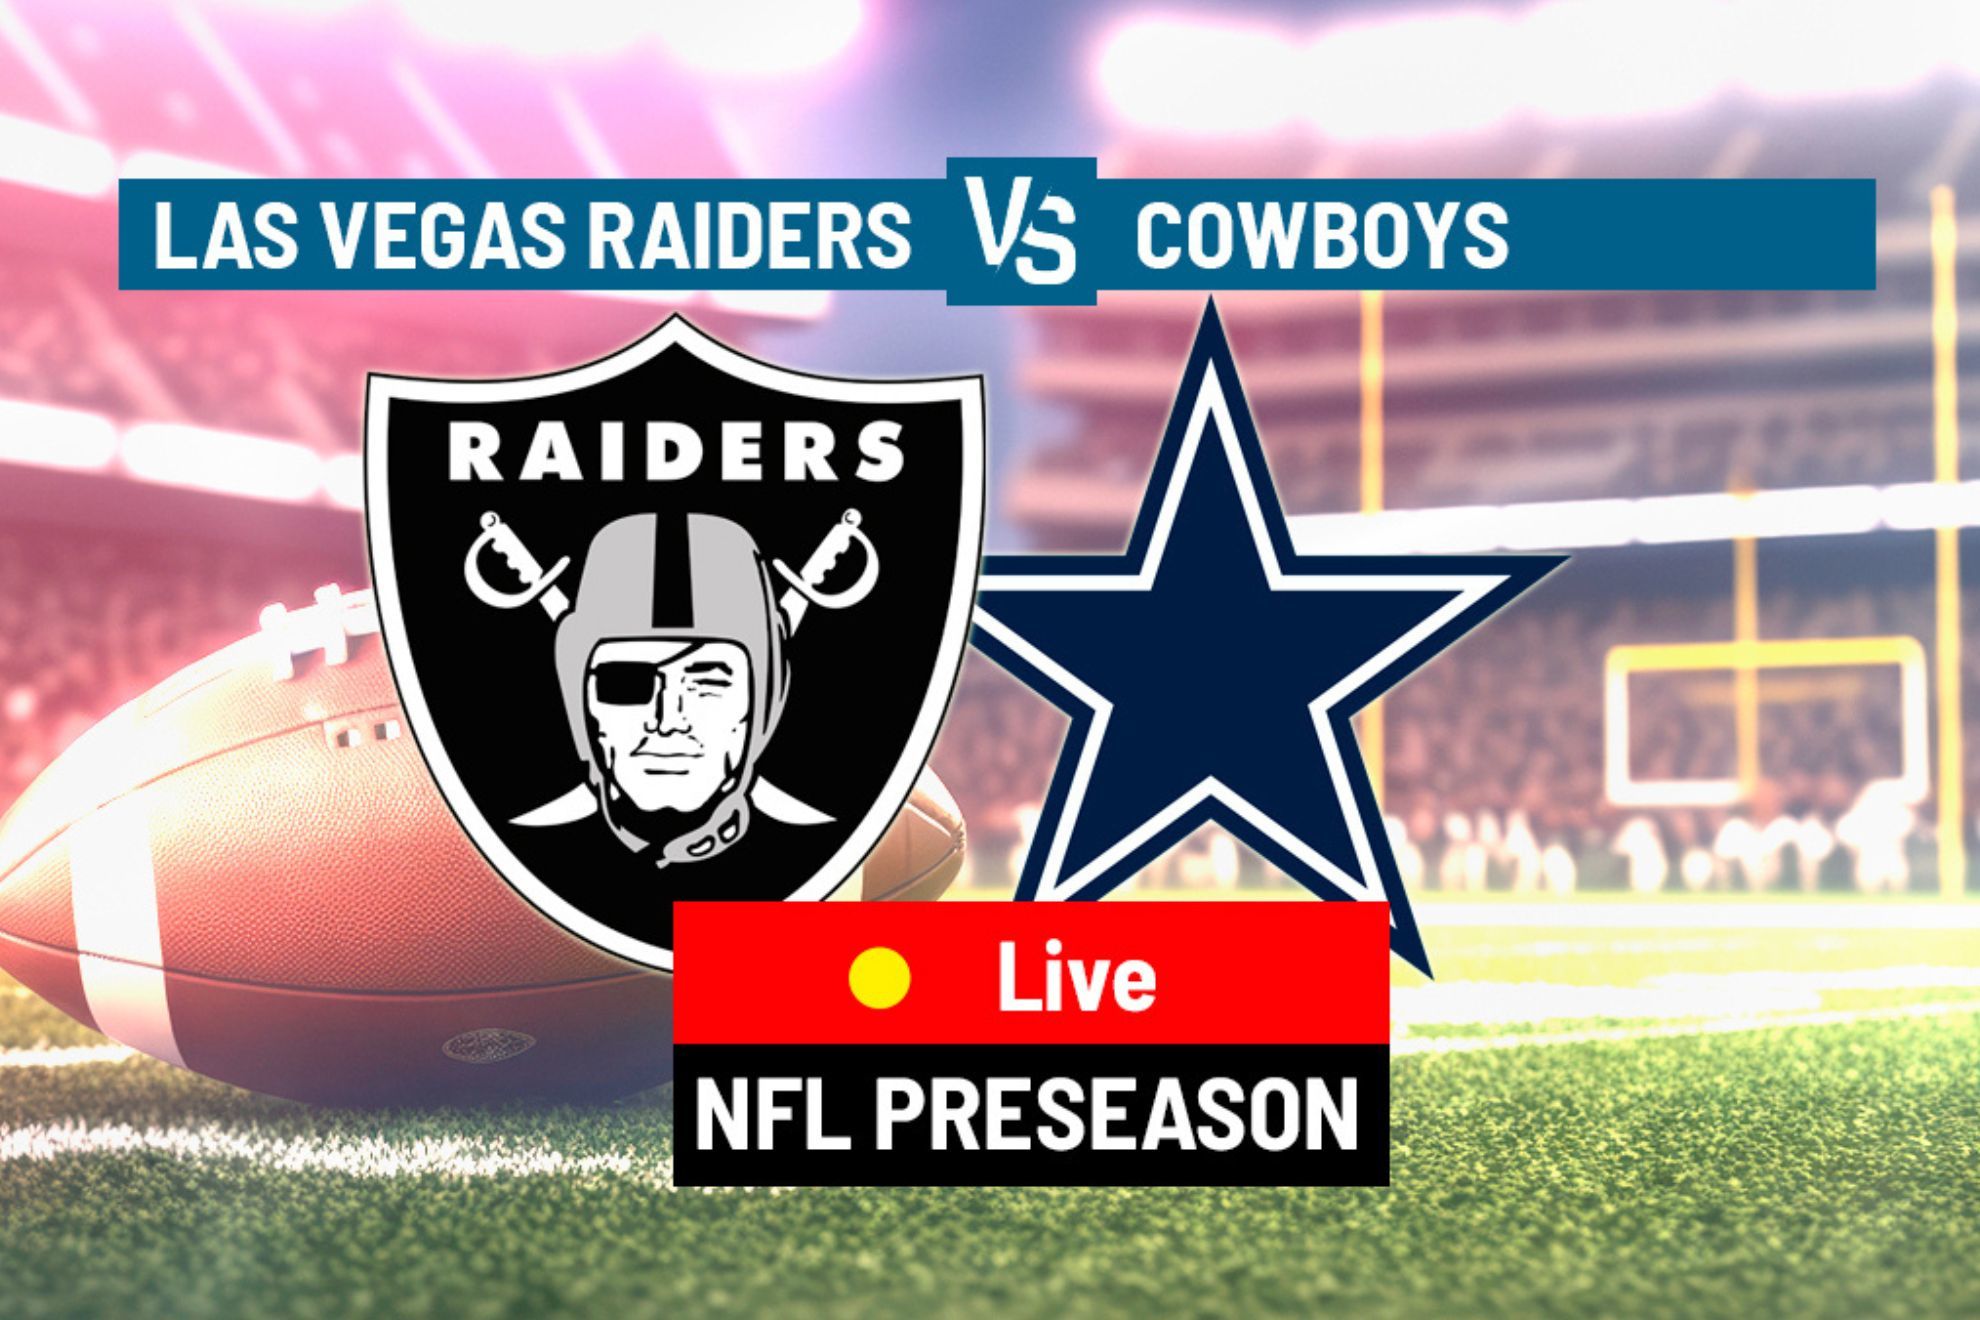 Raiders - Cowboys LIVE: Final score and play-by-play of NFL preseason finale